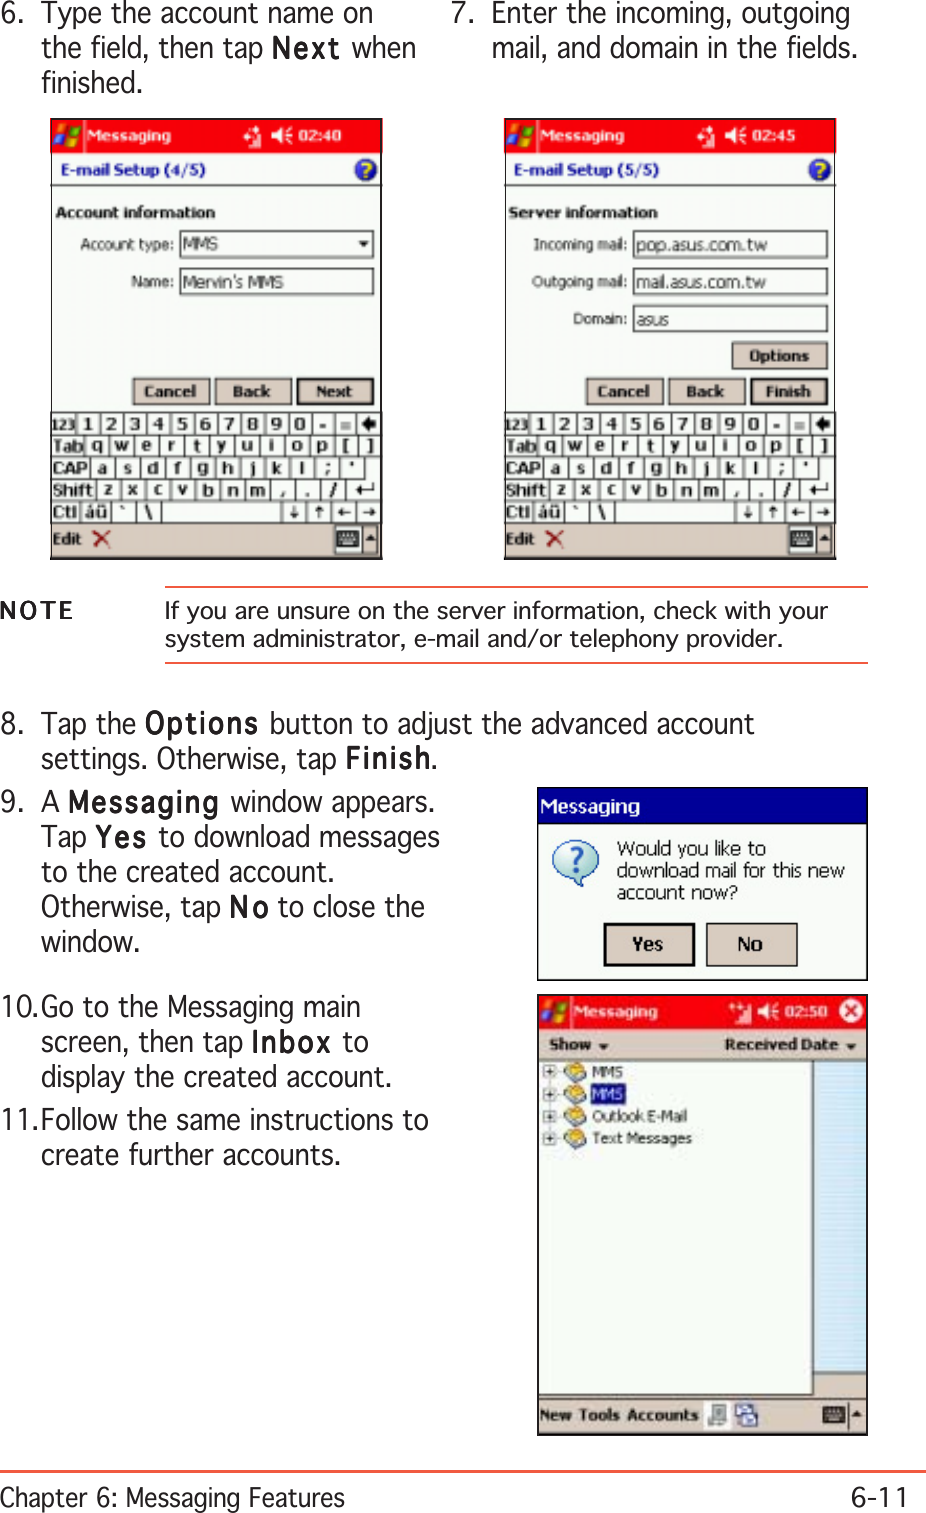 Chapter 6: Messaging Features6-116. Type the account name onthe field, then tap NextNextNextNextNext whenfinished.7. Enter the incoming, outgoingmail, and domain in the fields.NOTENOTENOTENOTEN O T E If you are unsure on the server information, check with yoursystem administrator, e-mail and/or telephony provider.8. Tap the OptionsOptionsOptionsOptionsOptions button to adjust the advanced accountsettings. Otherwise, tap FinishFinishFinishFinishFinish.9. A MessagingMessagingMessagingMessagingMessaging window appears.Tap YesYesYesYesYe s  to download messagesto the created account.Otherwise, tap NoNoNoNoN o to close thewindow.10.Go to the Messaging mainscreen, then tap InboxInboxInboxInboxInbox todisplay the created account.11.Follow the same instructions tocreate further accounts.